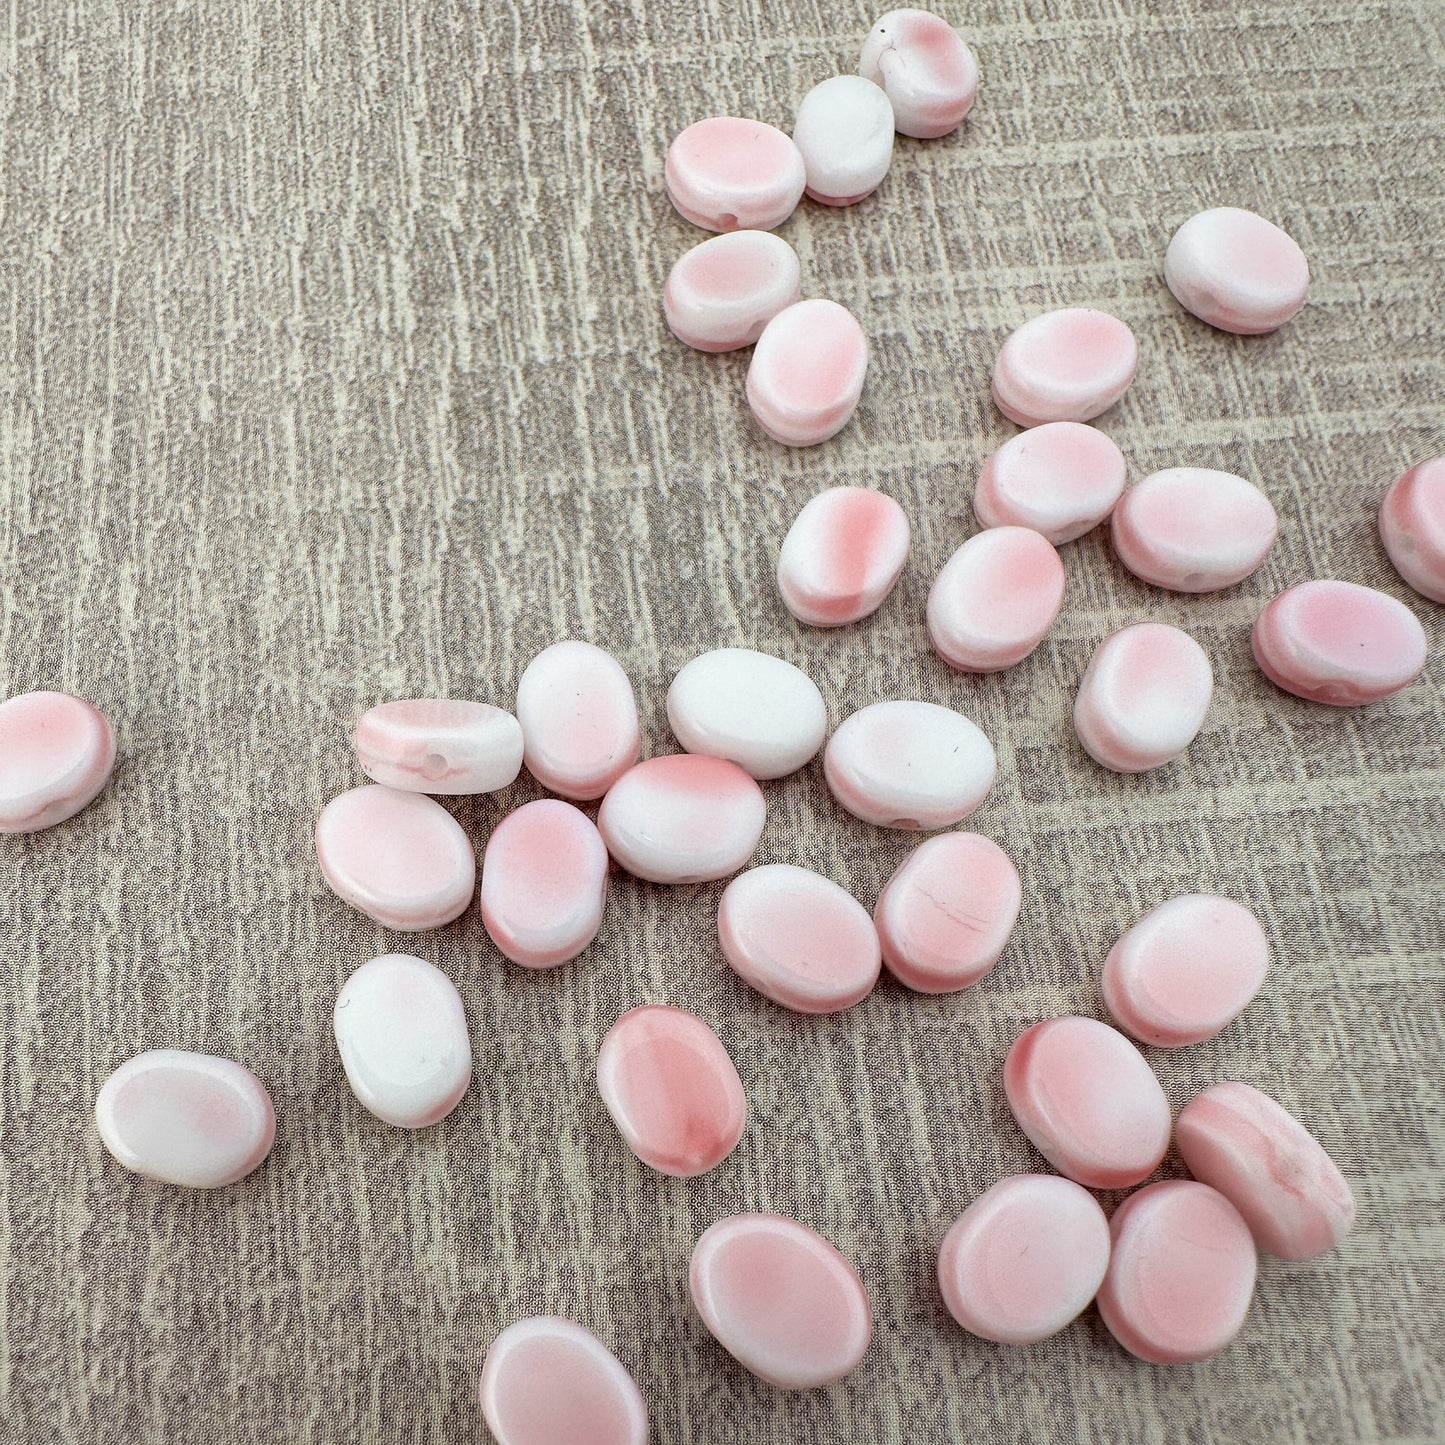 Vintage German 6x8mm Pink and White Flat Oval Glass Bead - 4 pcs. (Z302)